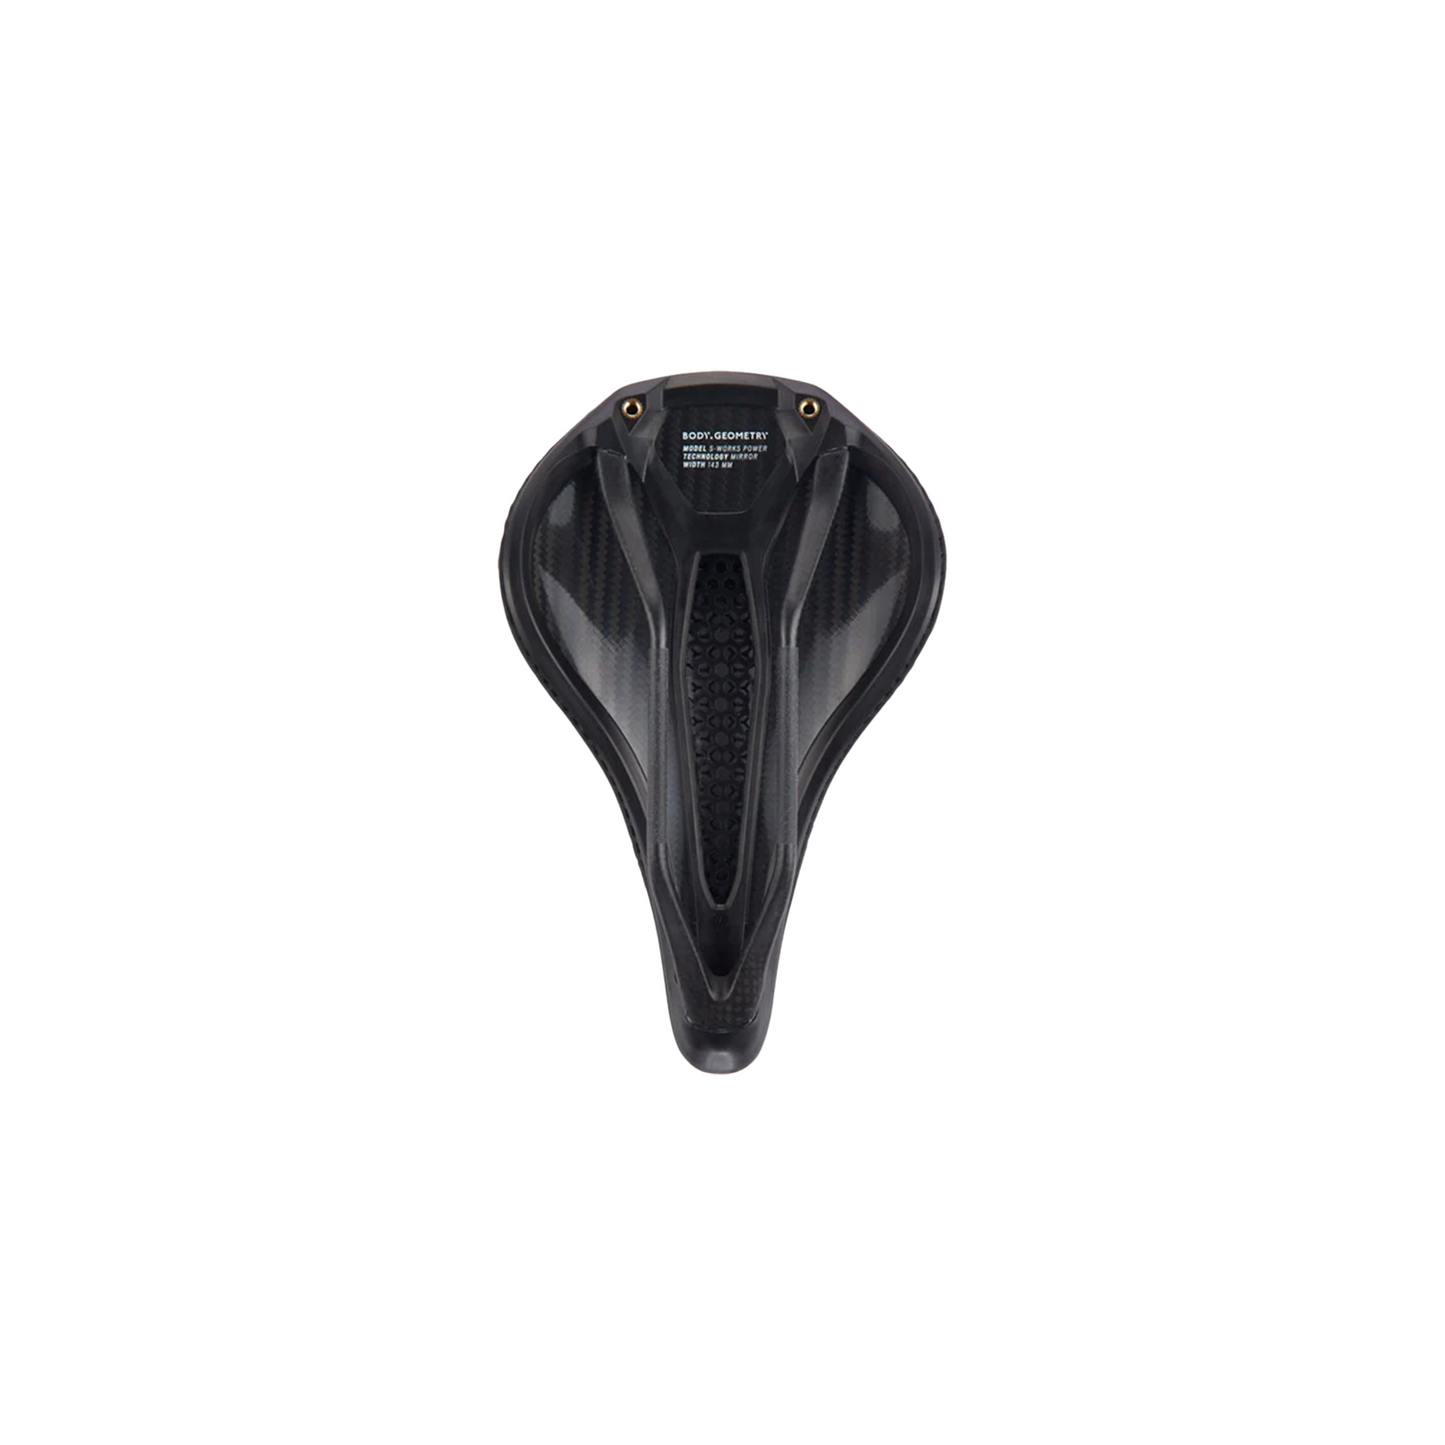 S-Works Power Saddle Mirror Saddle | Complete Cyclist - We’re redefining comfort and performance with Mirror technology to take Body Geometry into the future. The last big material innovation in saddle design happened decades ago with the introduction of foam. 